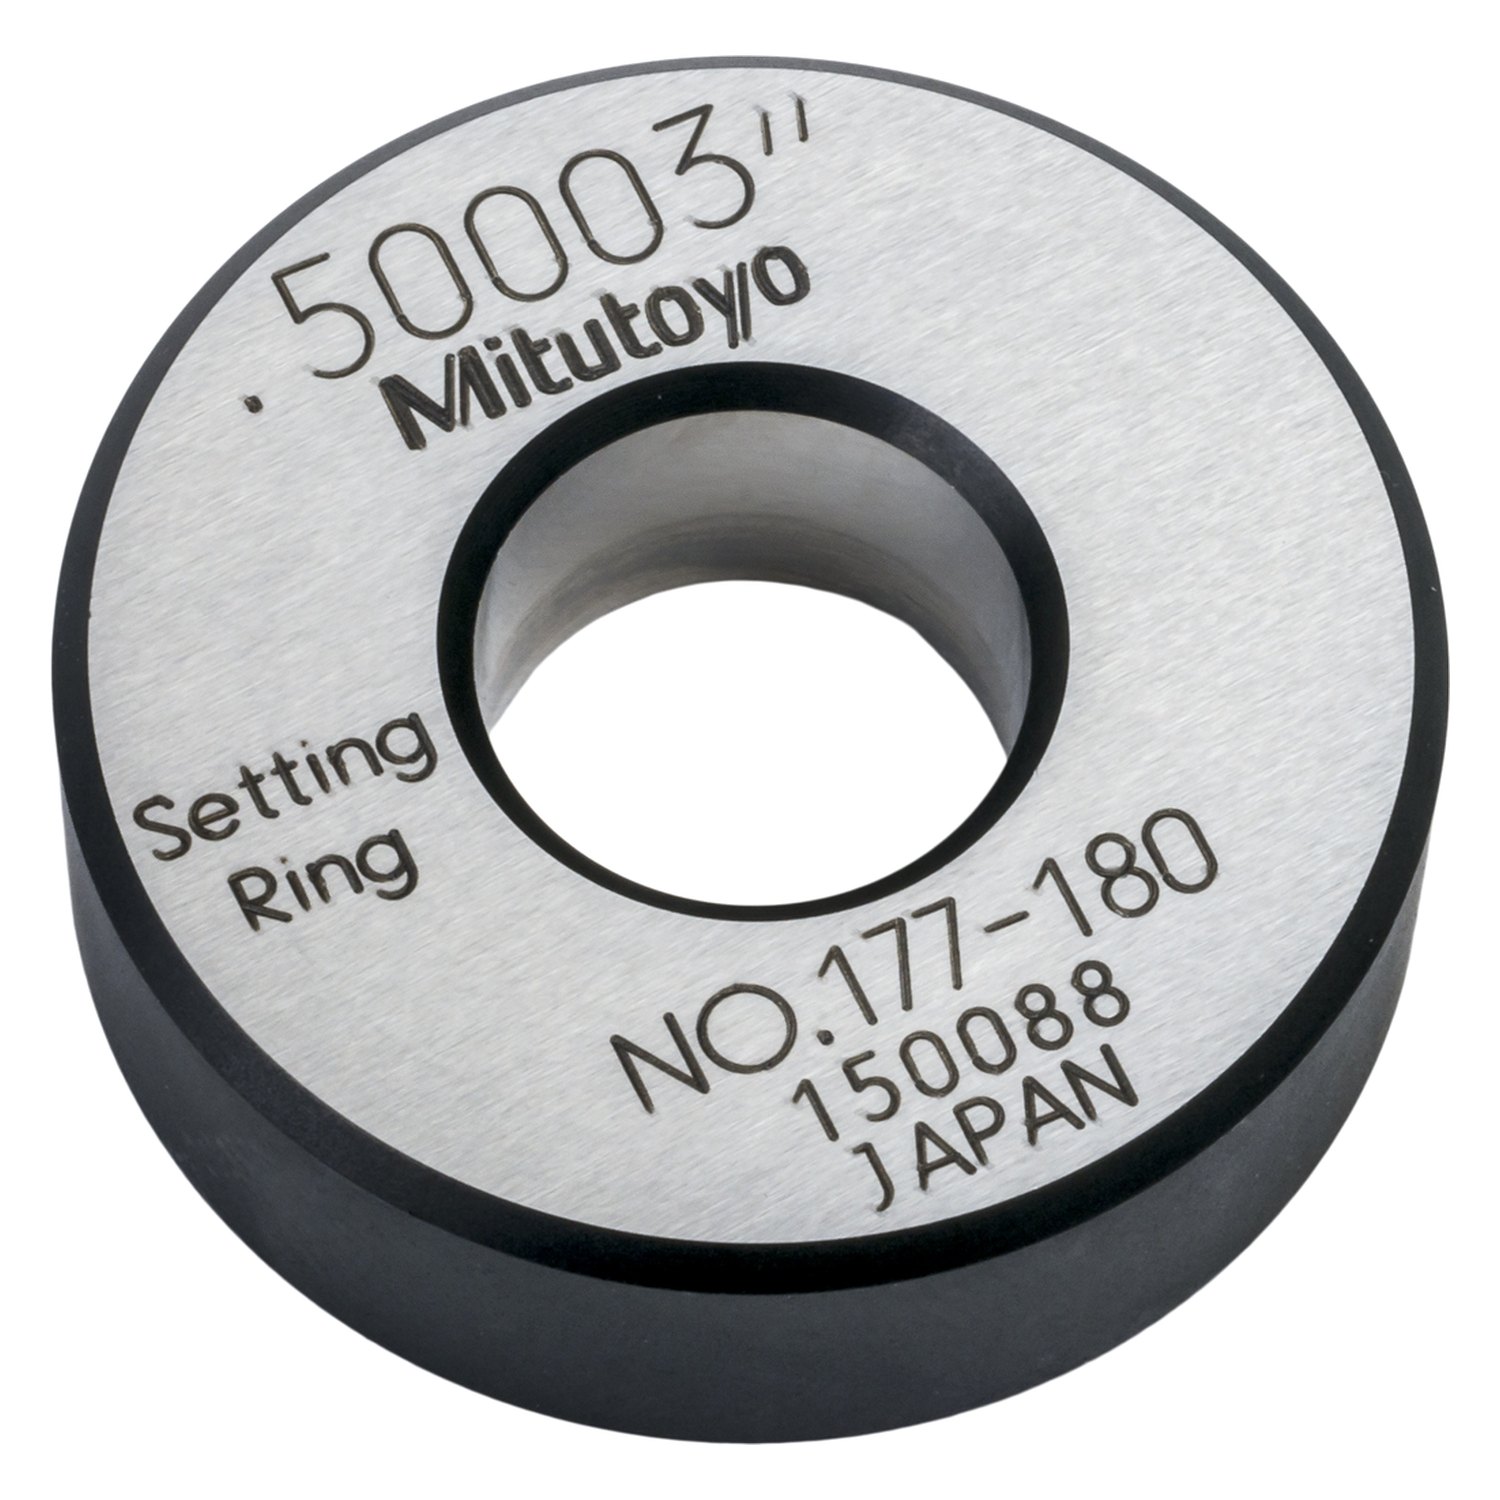 0.39 Width +/-0.00004 Accuracy 0.80 Size 1.77 Outside Diameter Mitutoyo 177-287 Setting Ring 